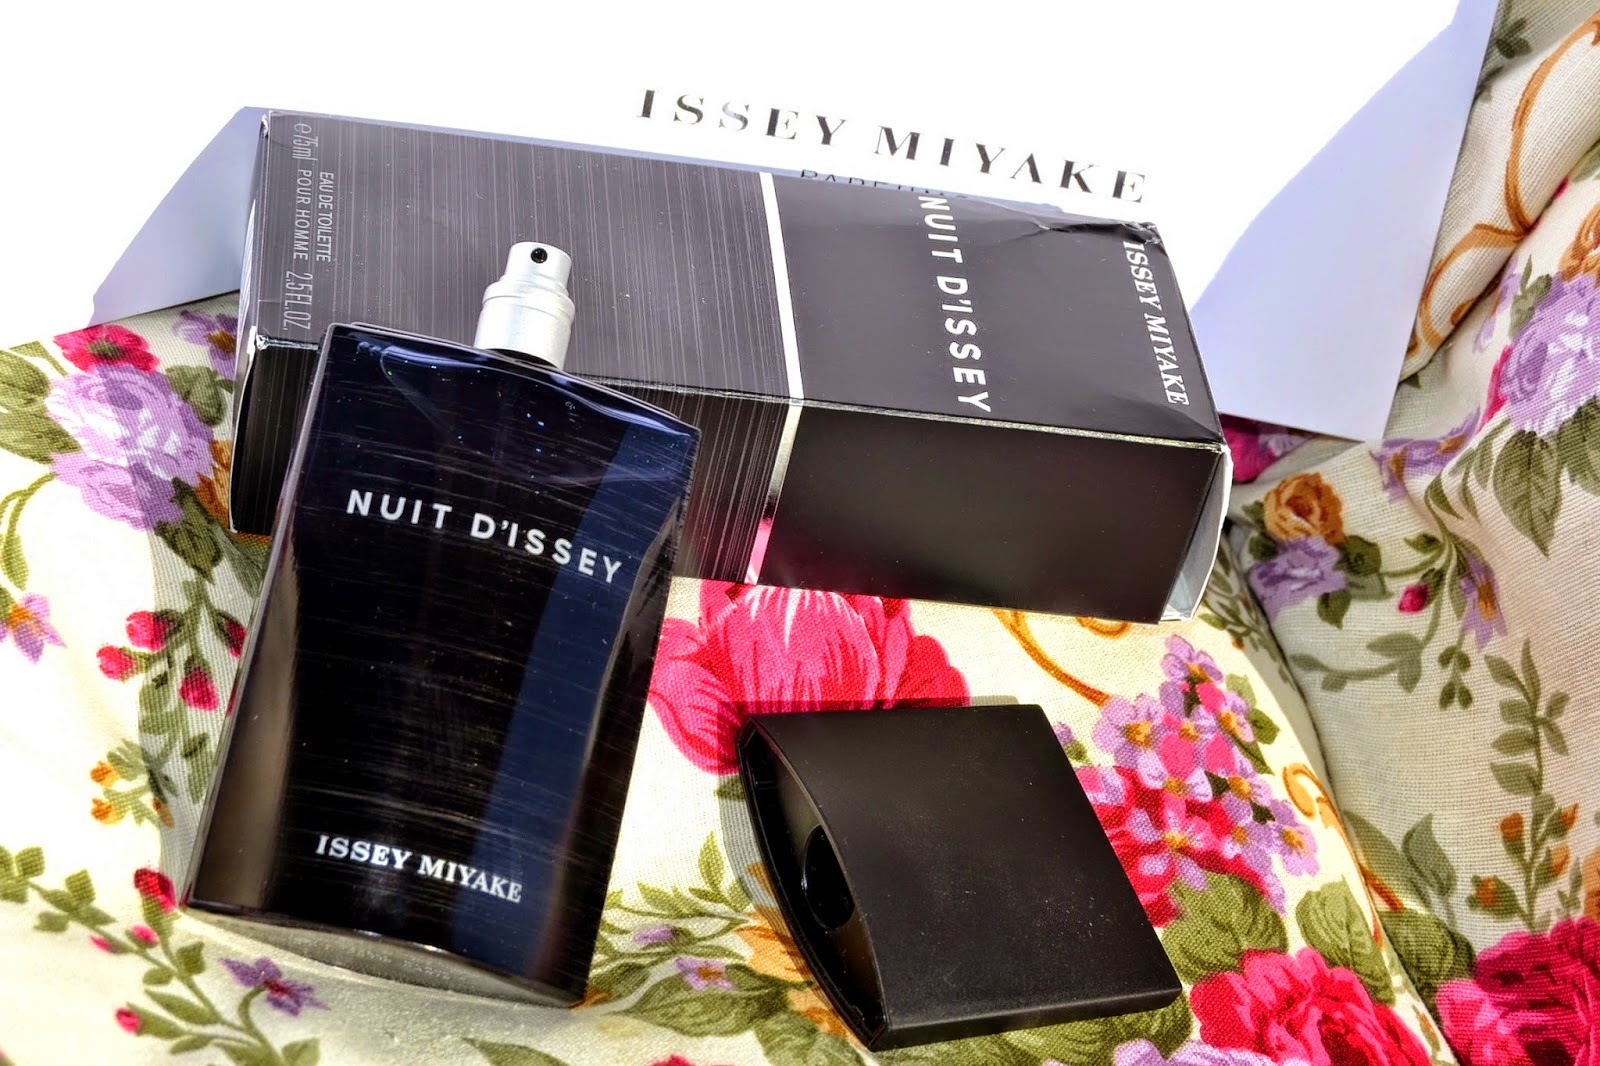 http://www.syriouslyinfashion.com/2014/10/nuit-dissey-by-issey-miyake.html